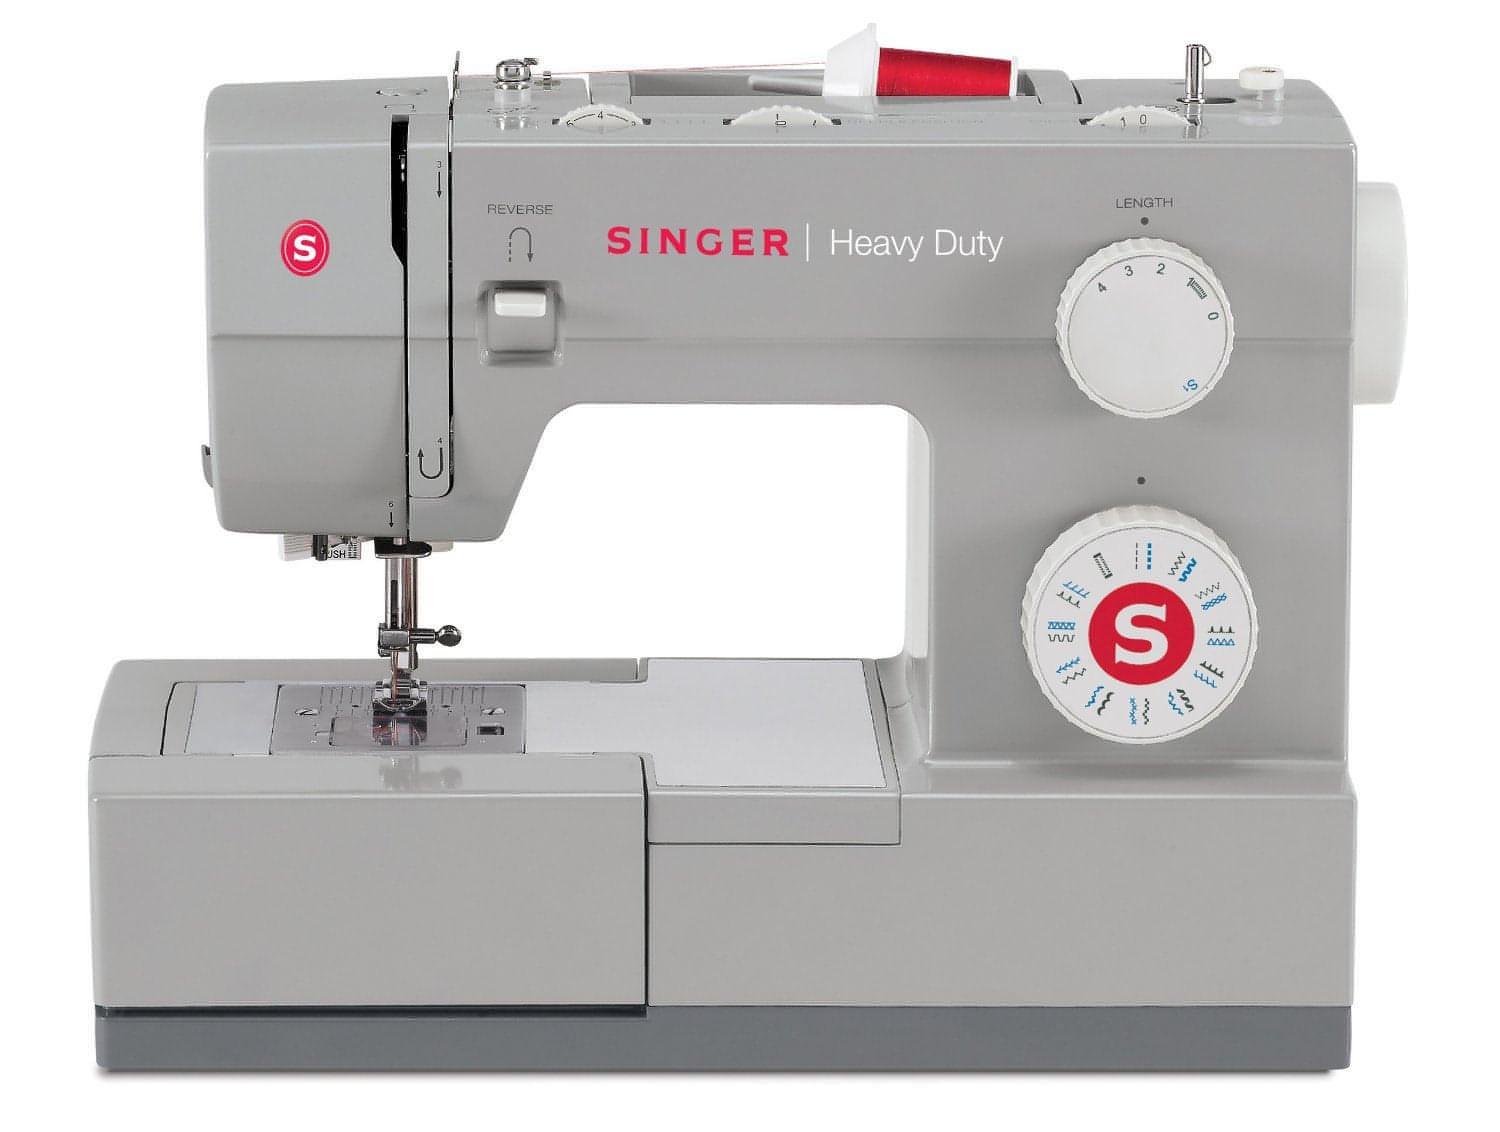 Singer Heavy Duty 4423 Sewing Machine with Accessory Bundle - Free Upgrade to 4432 model at no extra cost